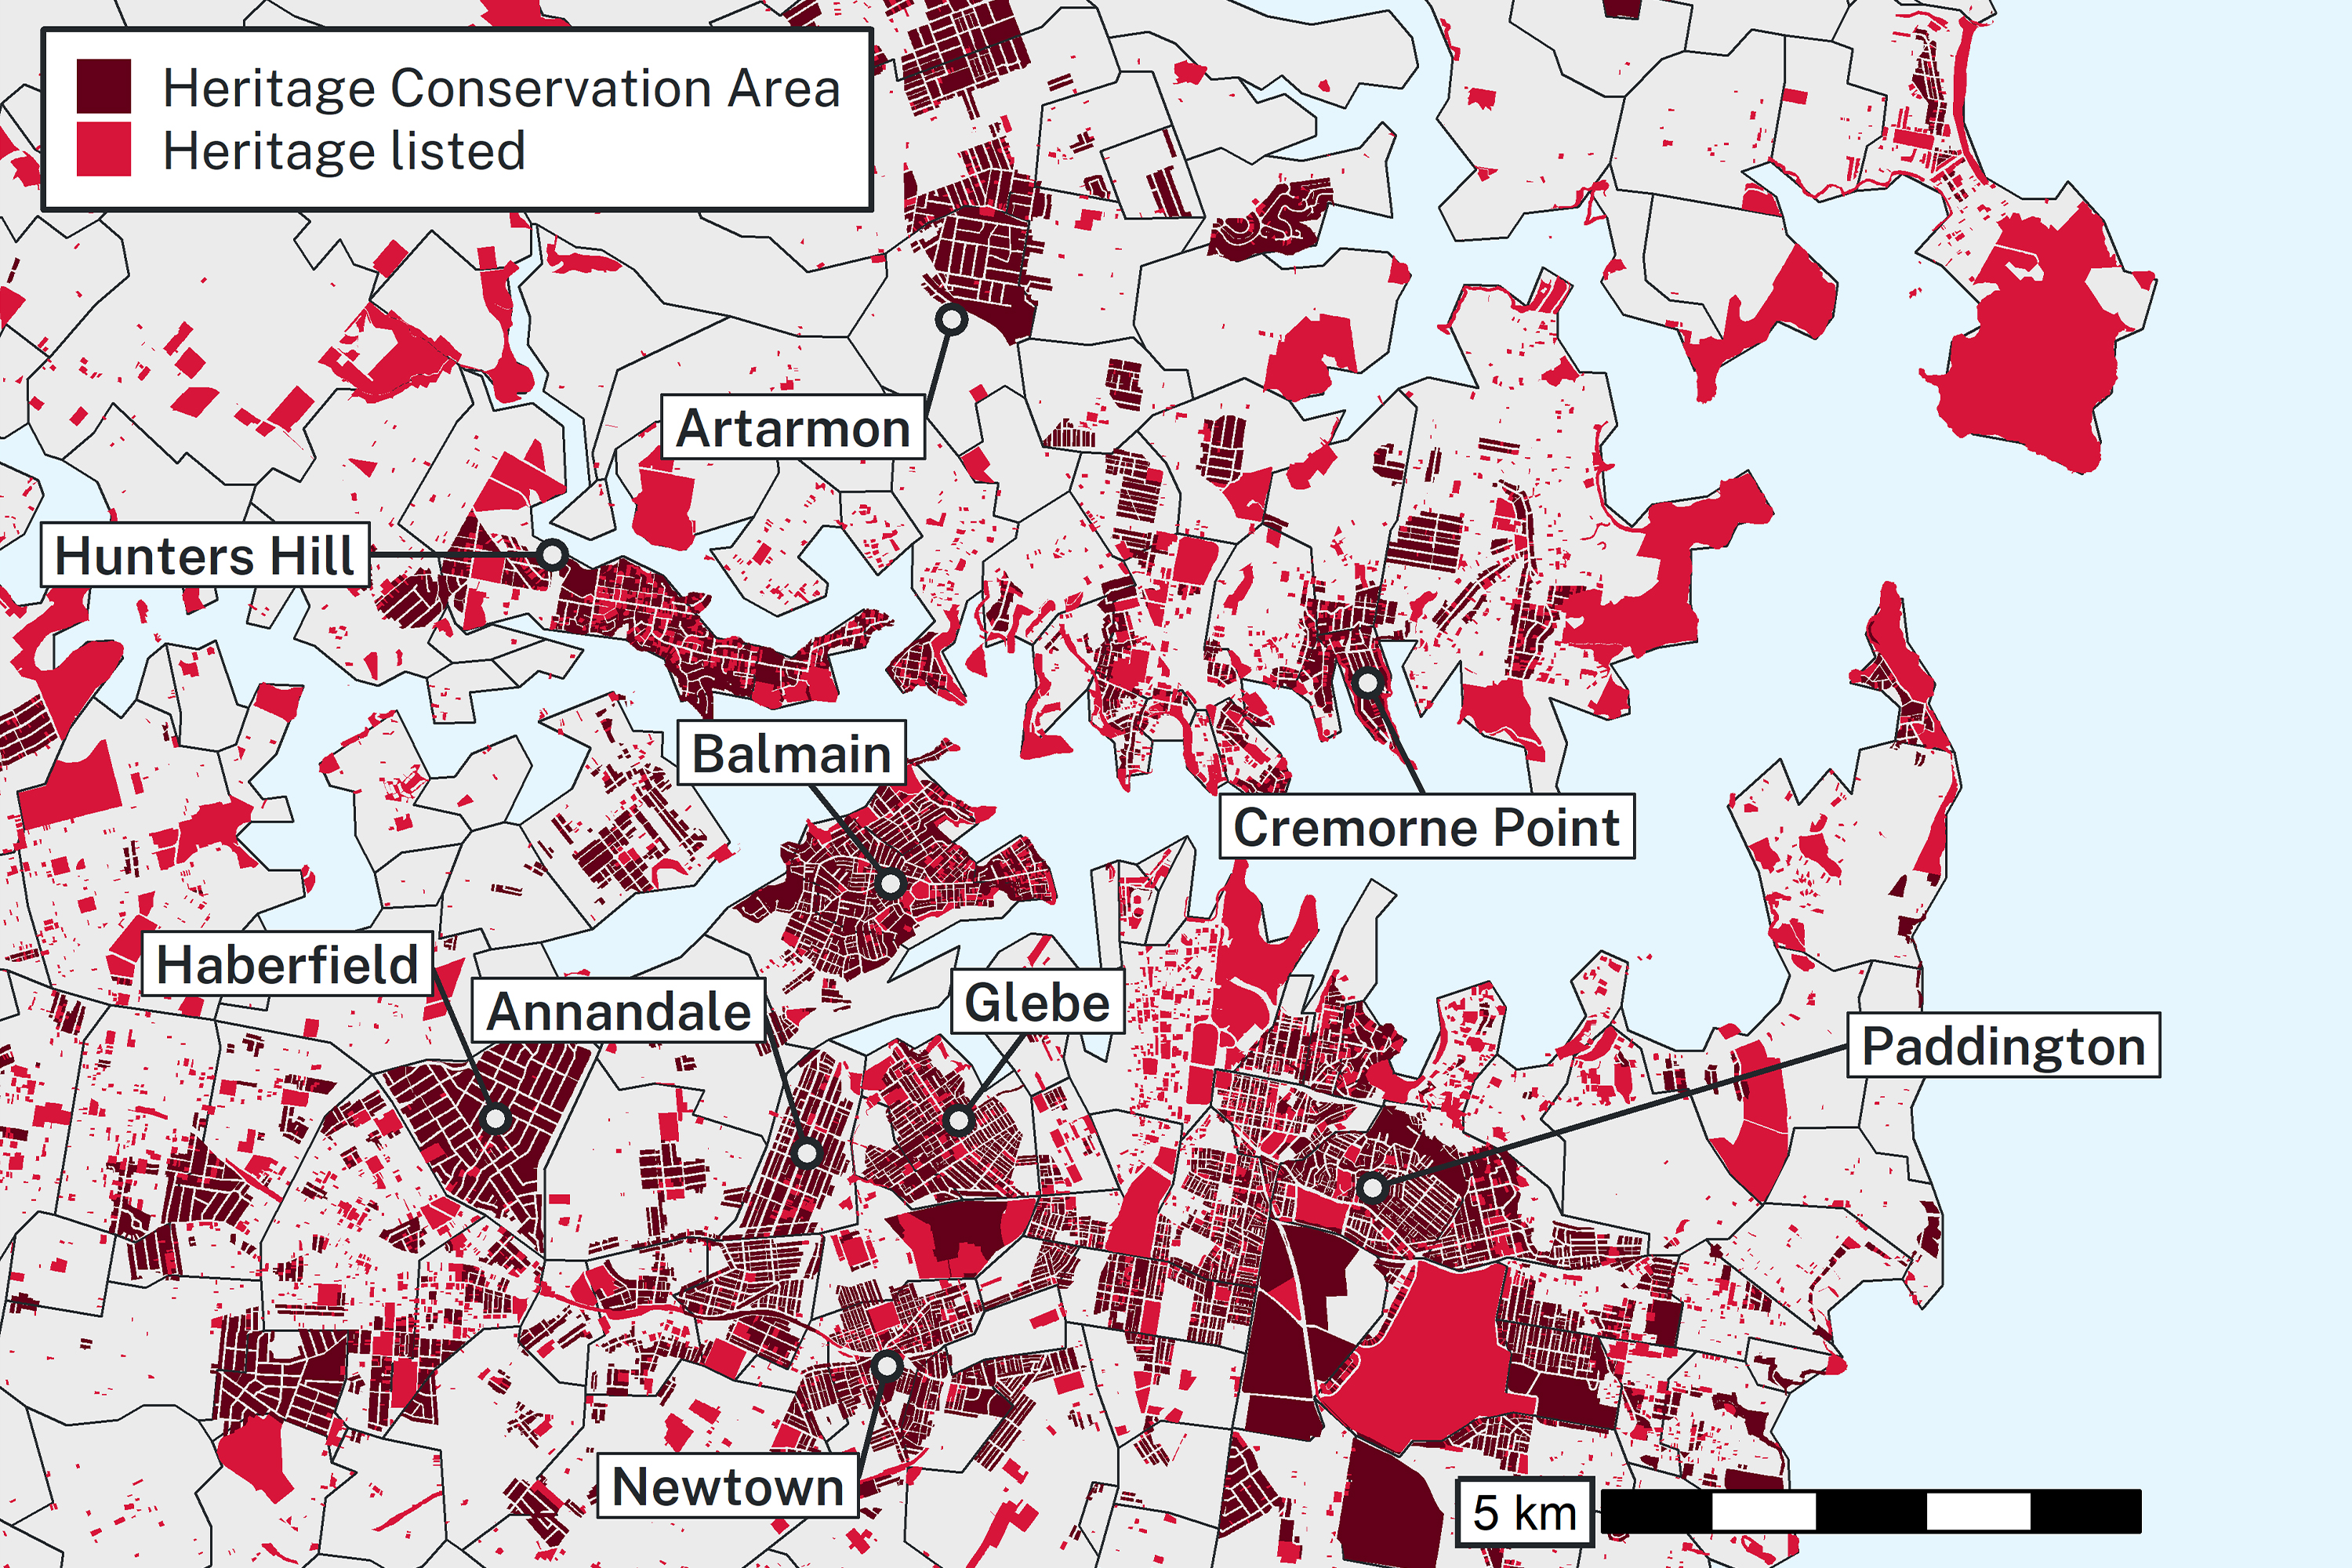 a map that shows where the heritage conservation areas in sydney and heritage listed places